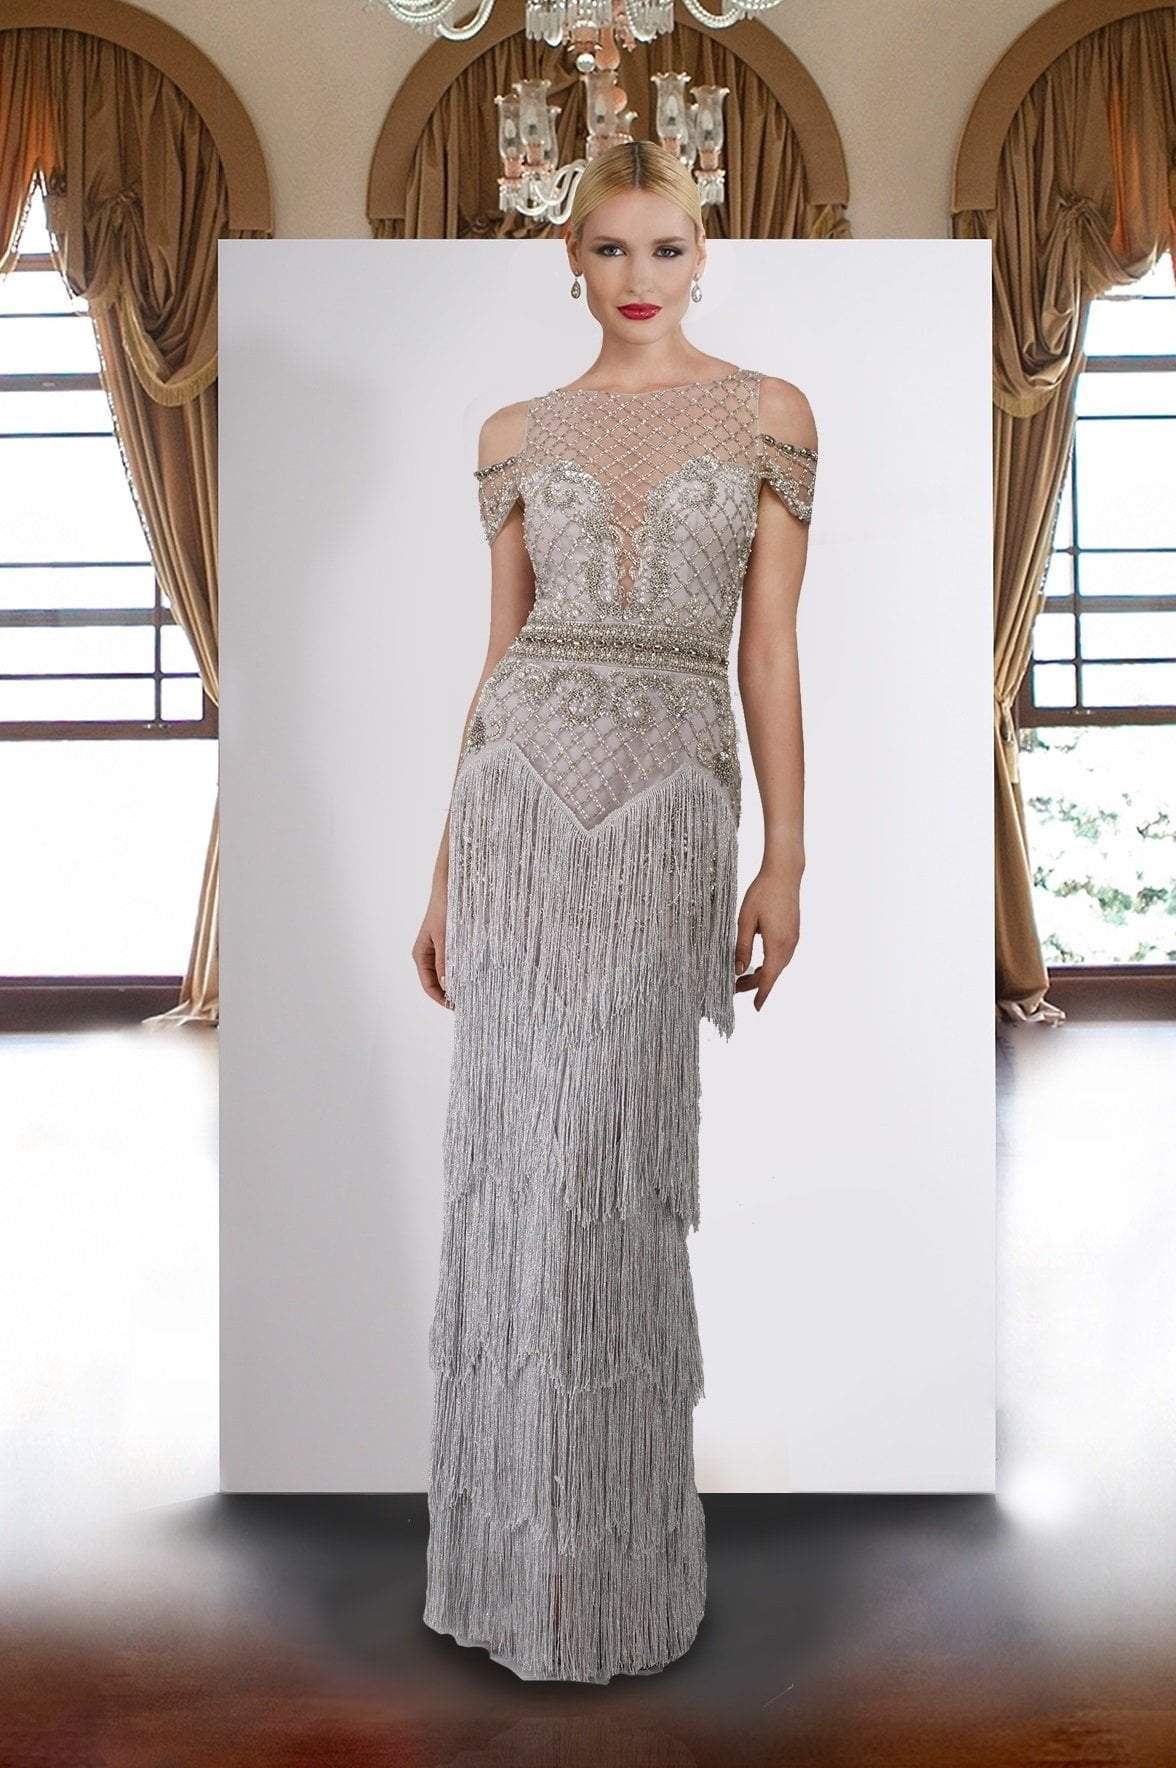 Janique - Lattice Beaded Illusion Bateau Fringe Gown W1683 In Silver and Gray